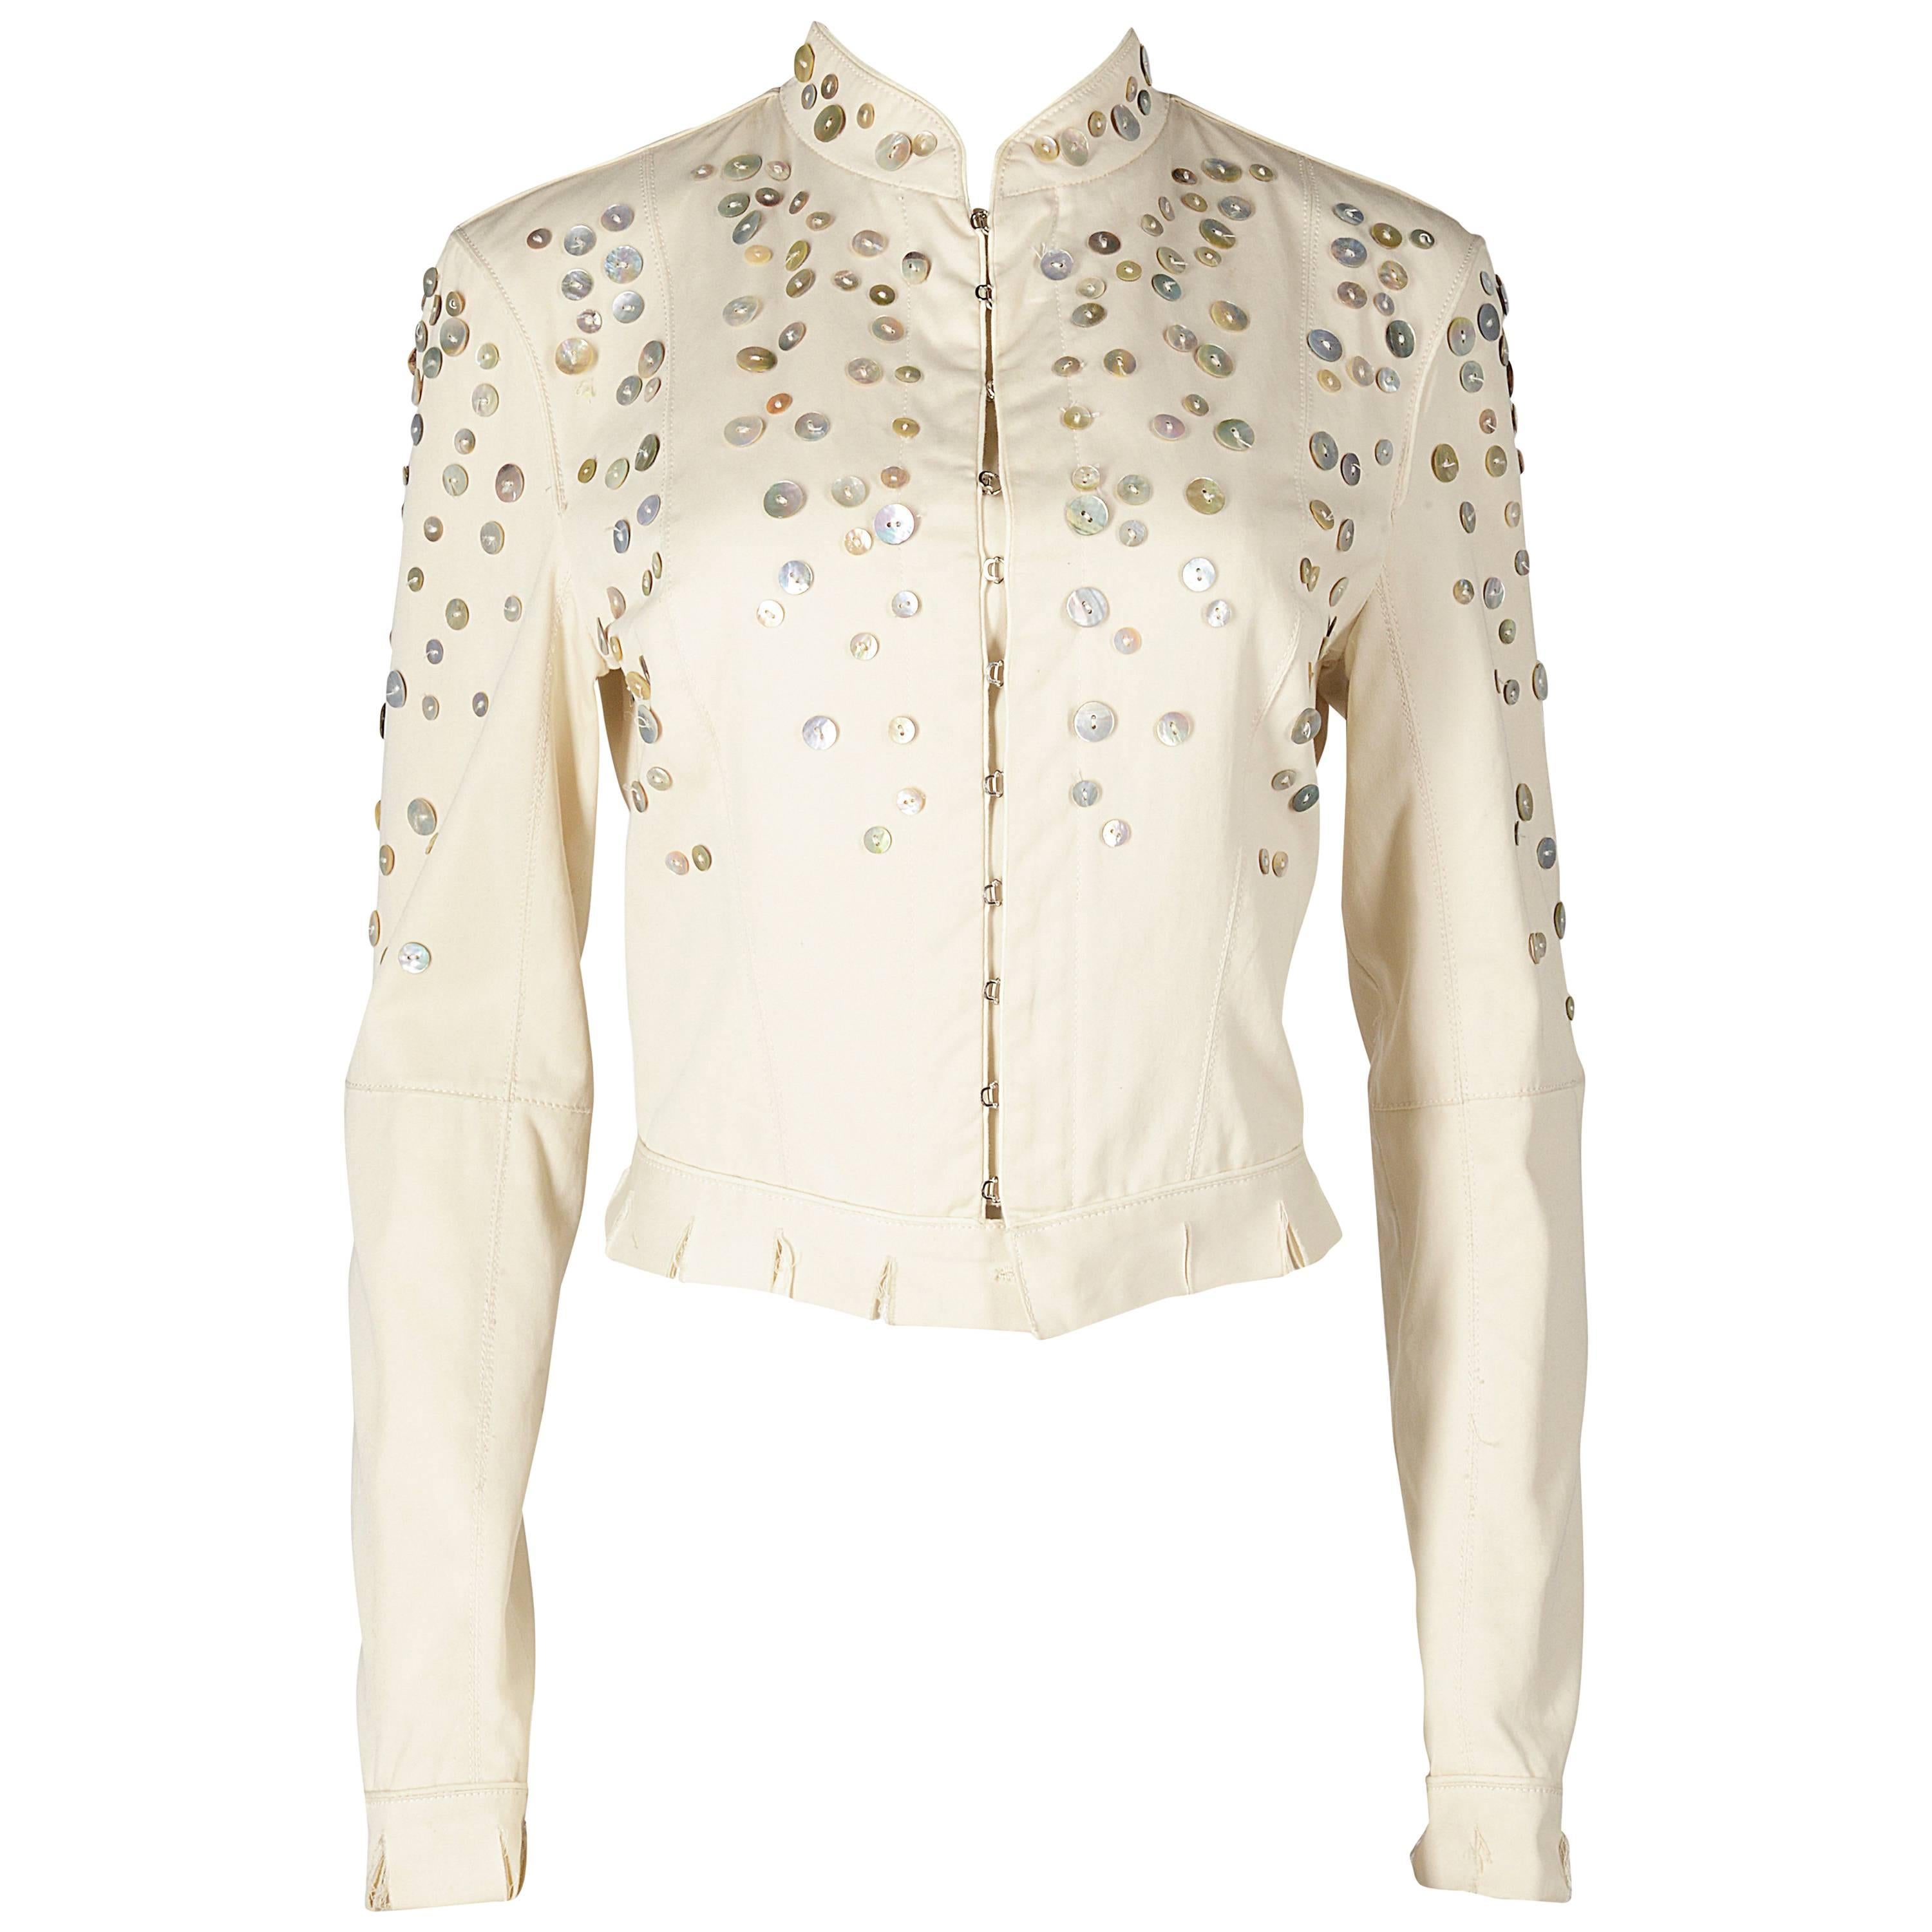 Alexander McQueen ivory cotton jacket with decorative pearl buttons, SS 2003 For Sale